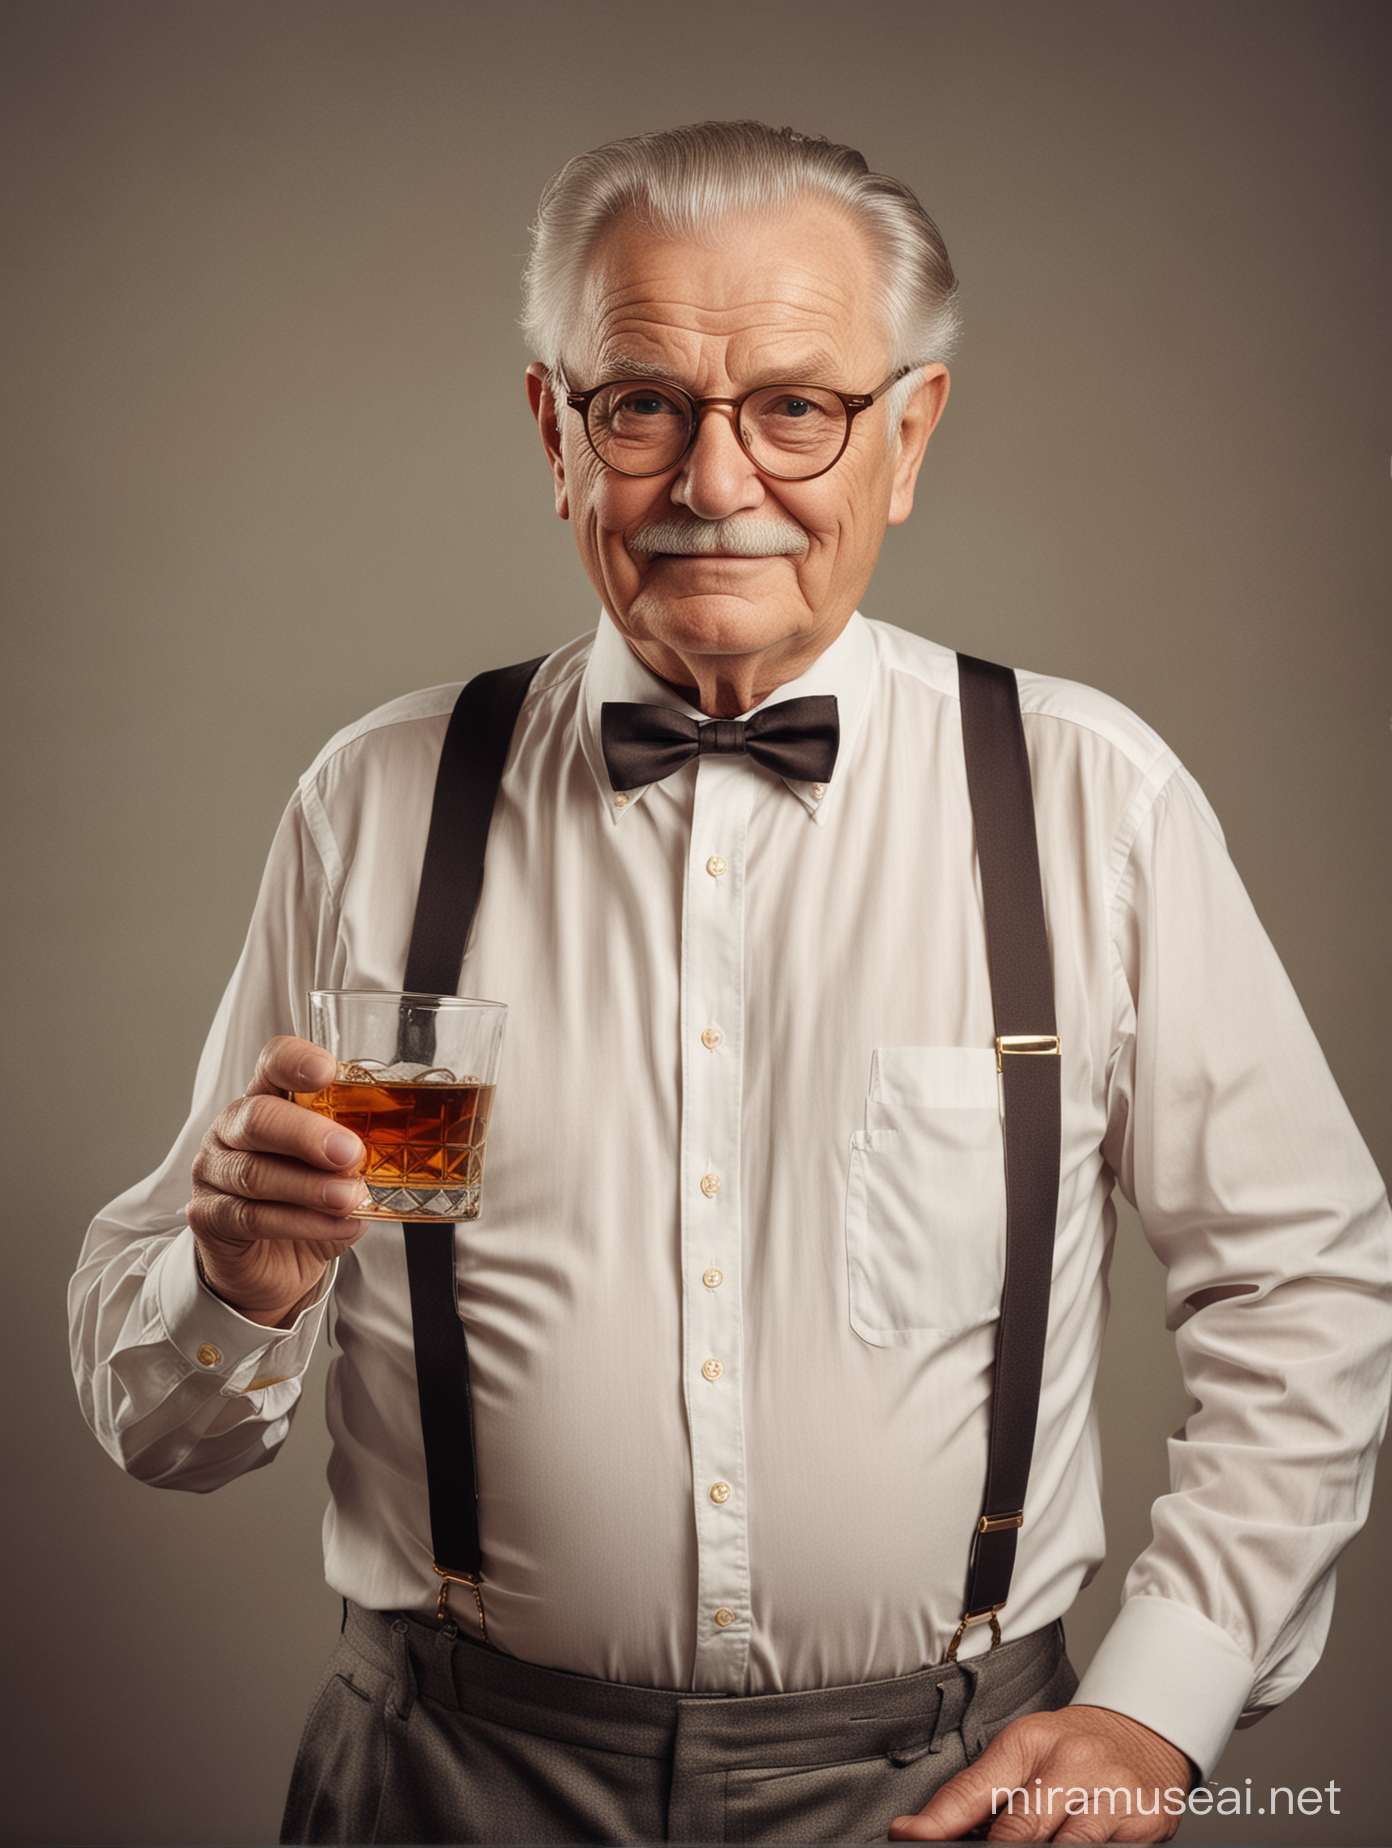 Chubby Elderly Man with Whiskey Glass and Glasses